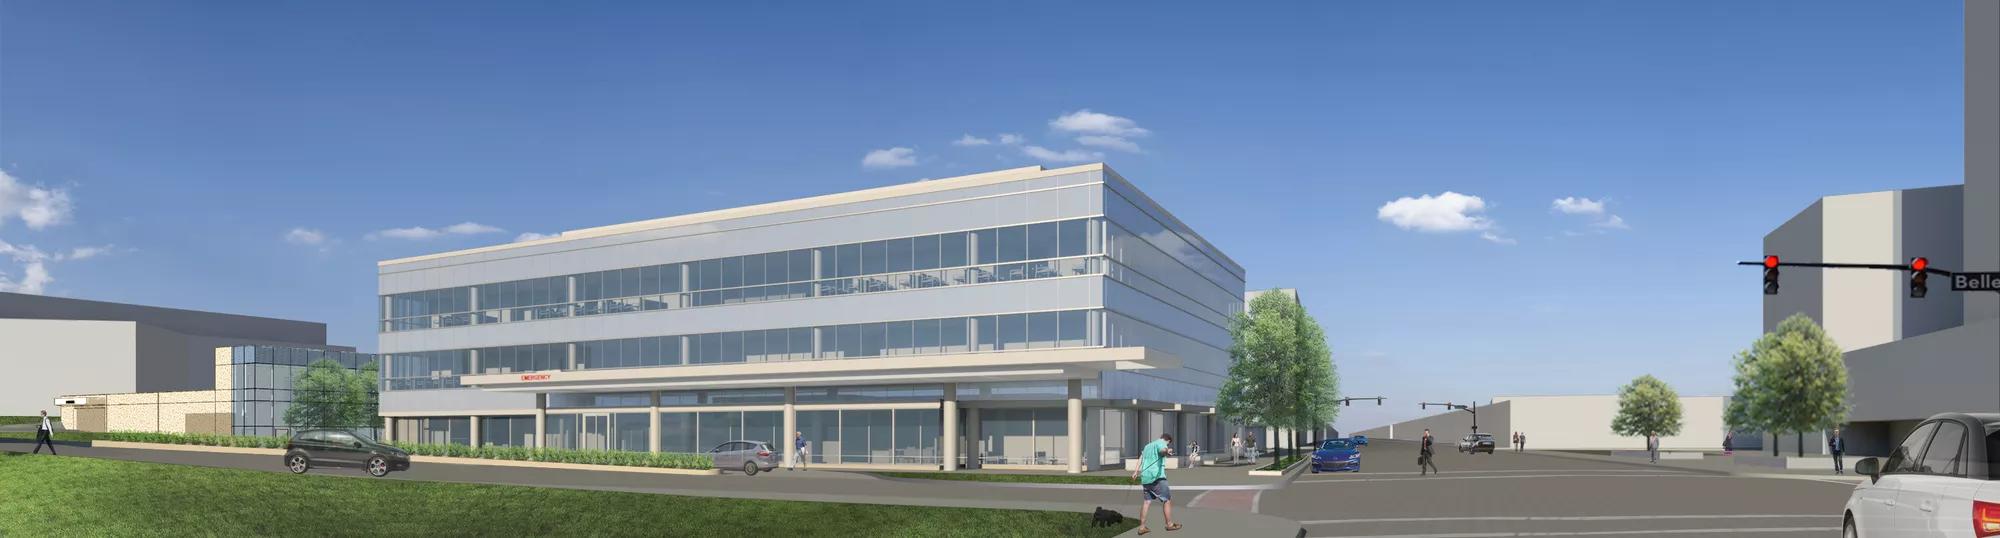 Cleveland Clinic Lakewood FHC Rendering